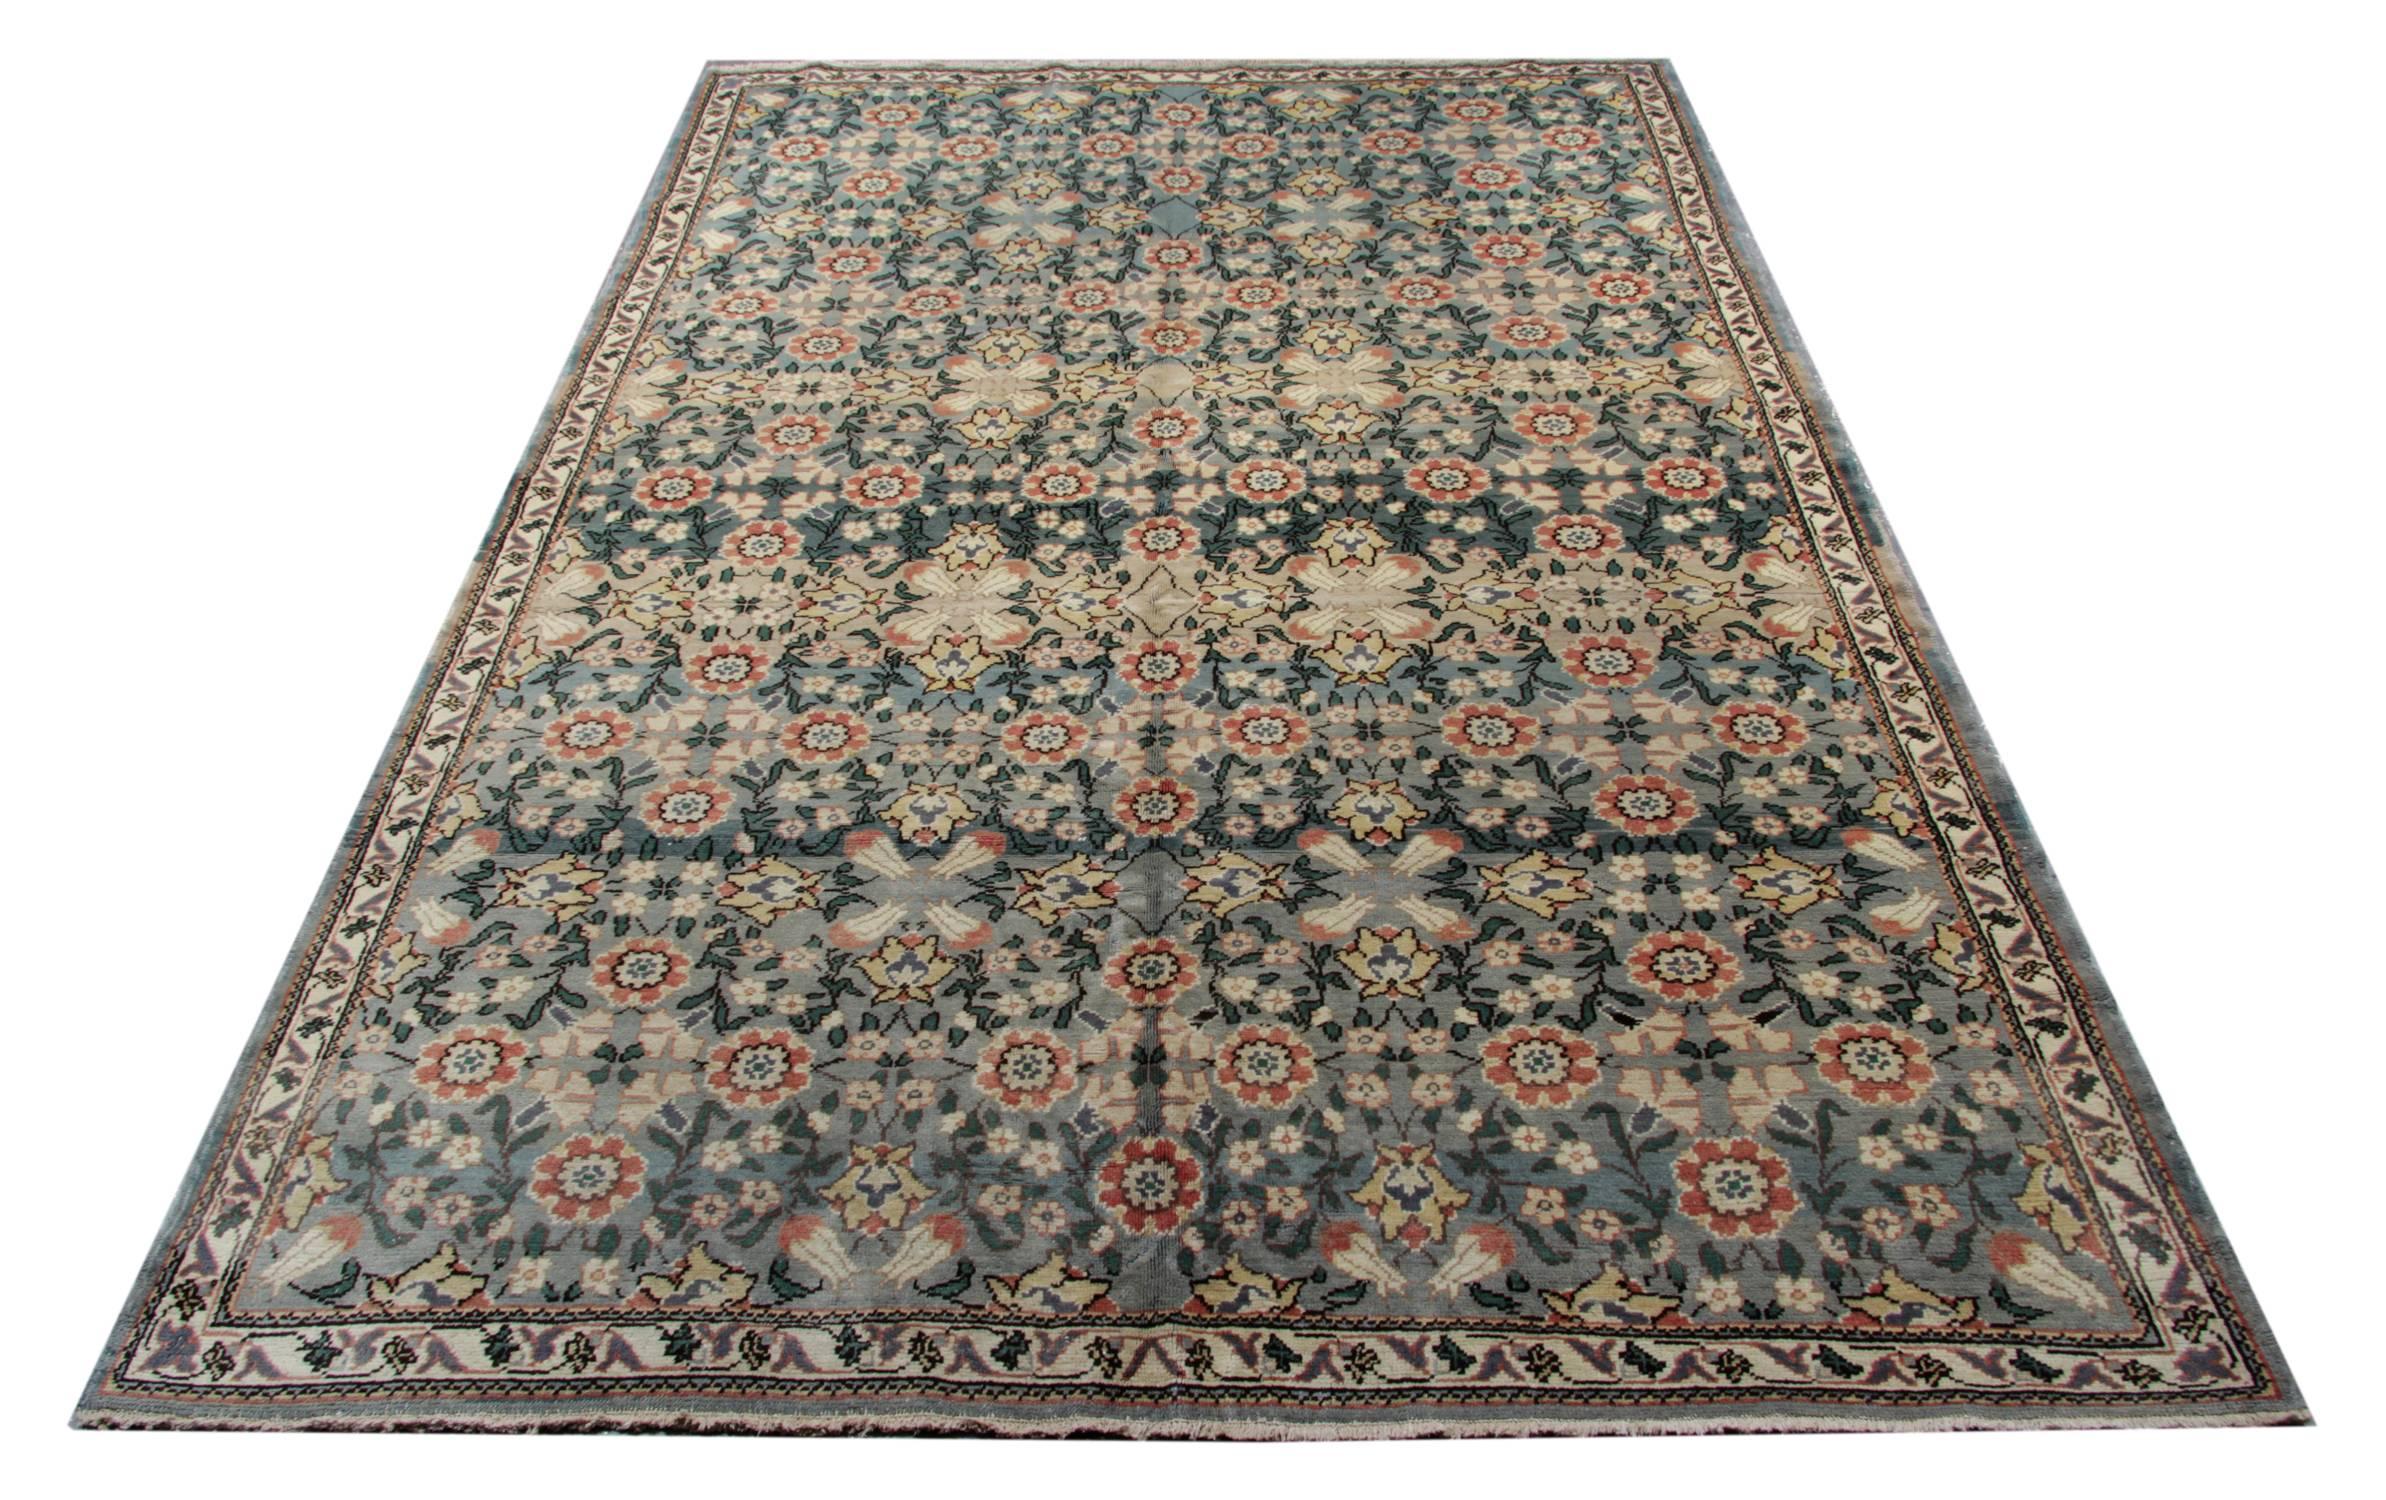 This handmade rug is an old Turkish Ushak Oushak carpet, circa 1950 and is a patterned rug with an all-over floral rug design 100% natural rugs made of organic dyes in excellent condition. This grey Oriental rug can be suitable for dining room or